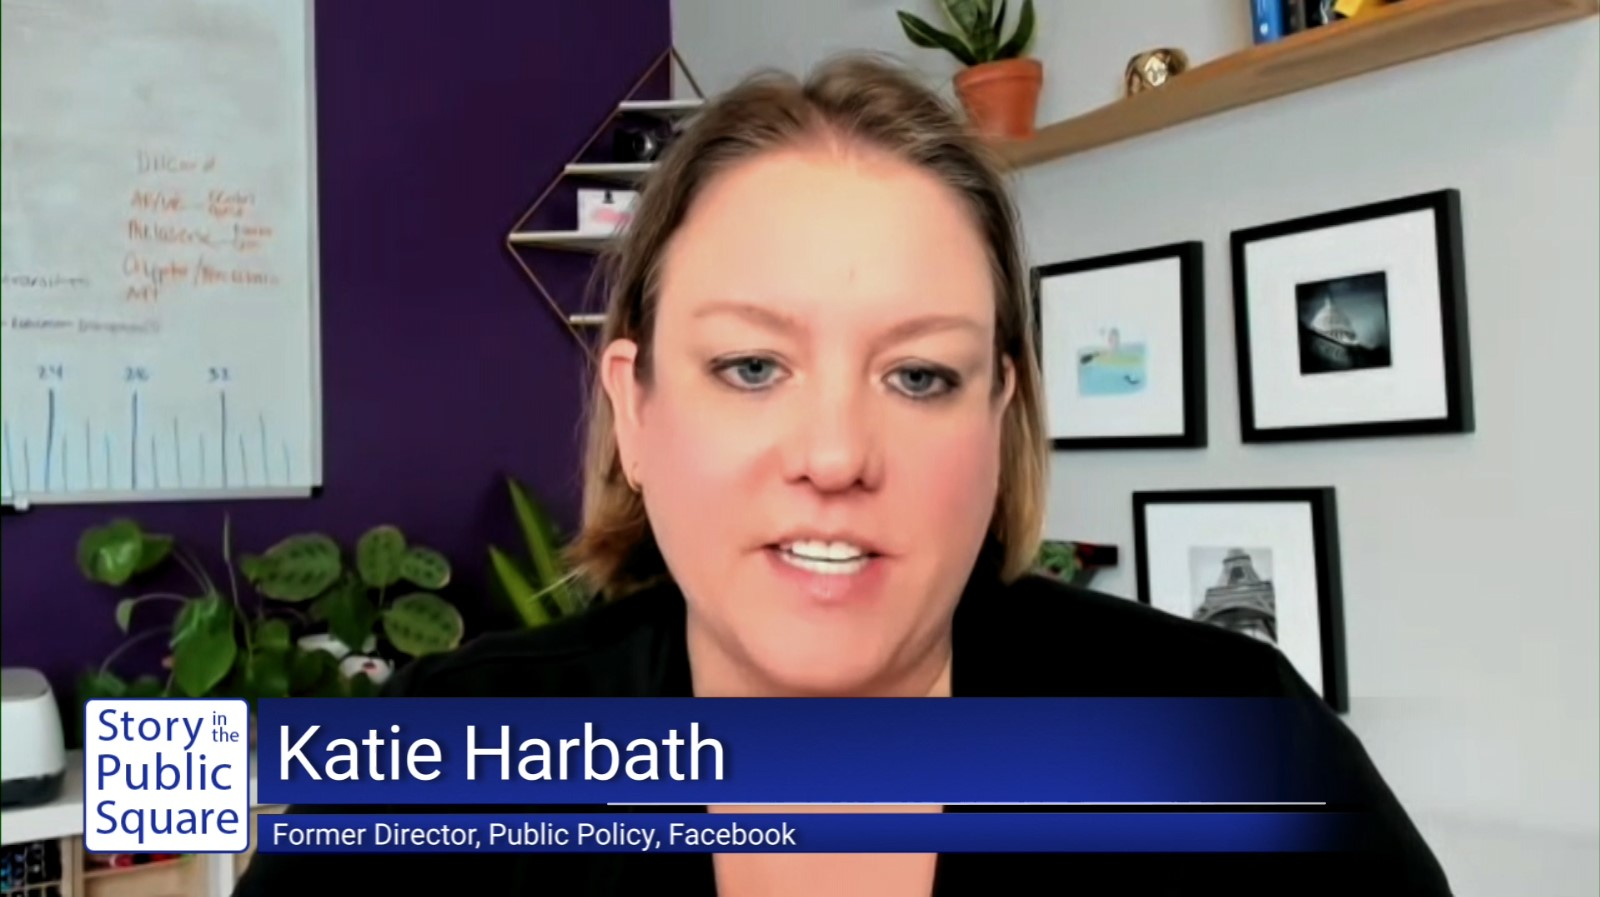 Tackling Election Integrity on Social Media with Katie Harbath